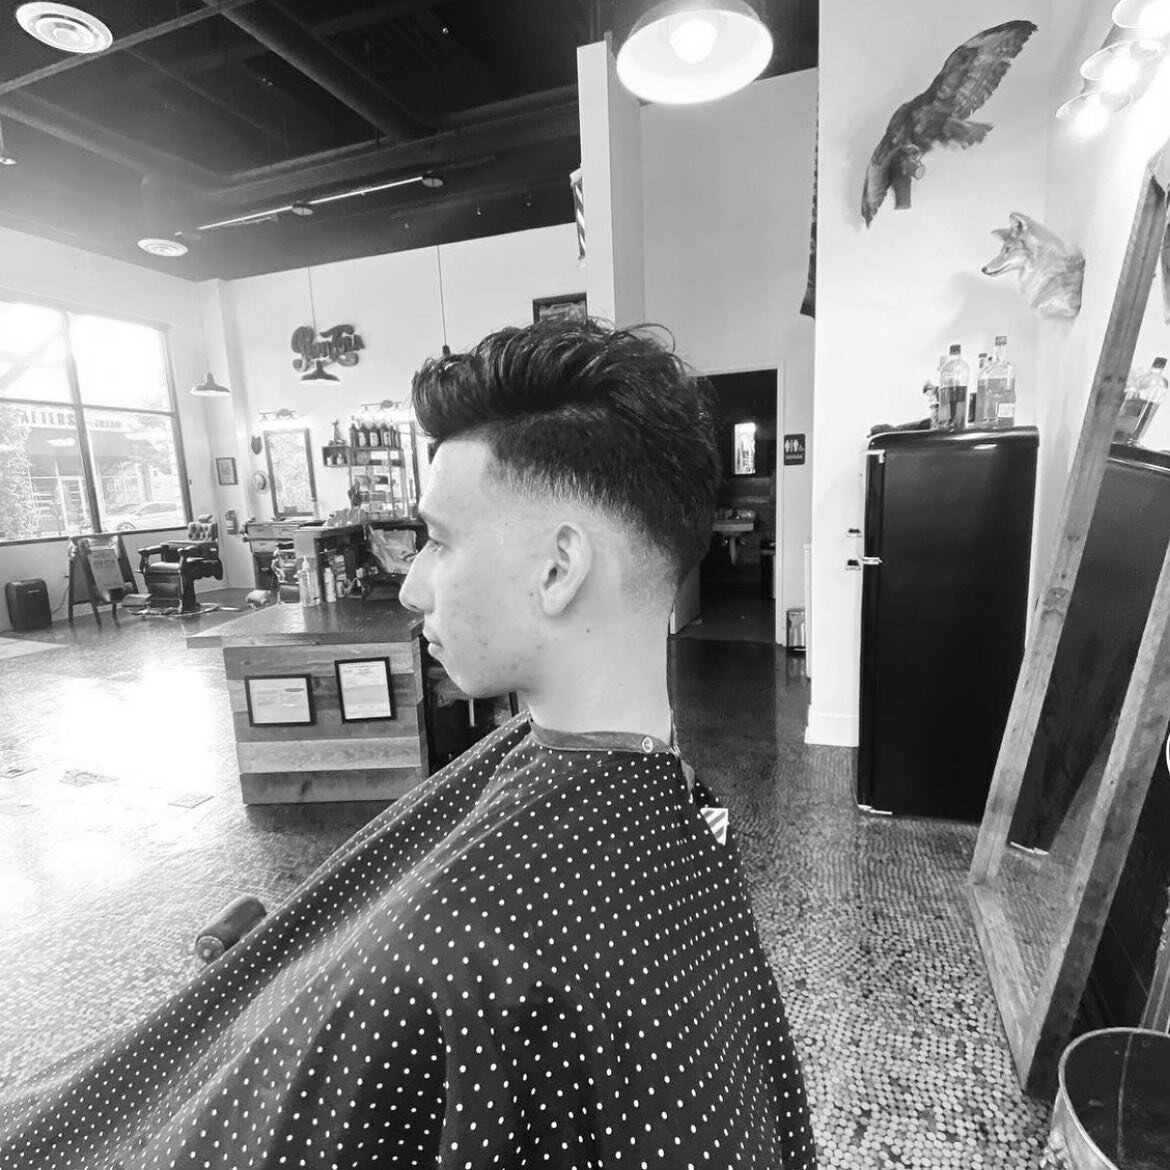 Its the beginning of a great week ☀️ hair by @voodoojacky 

#goodvibes #barbershop #haircut #shave #beardtrim #colorservice #barber #stylist #shopowner #calidays #love